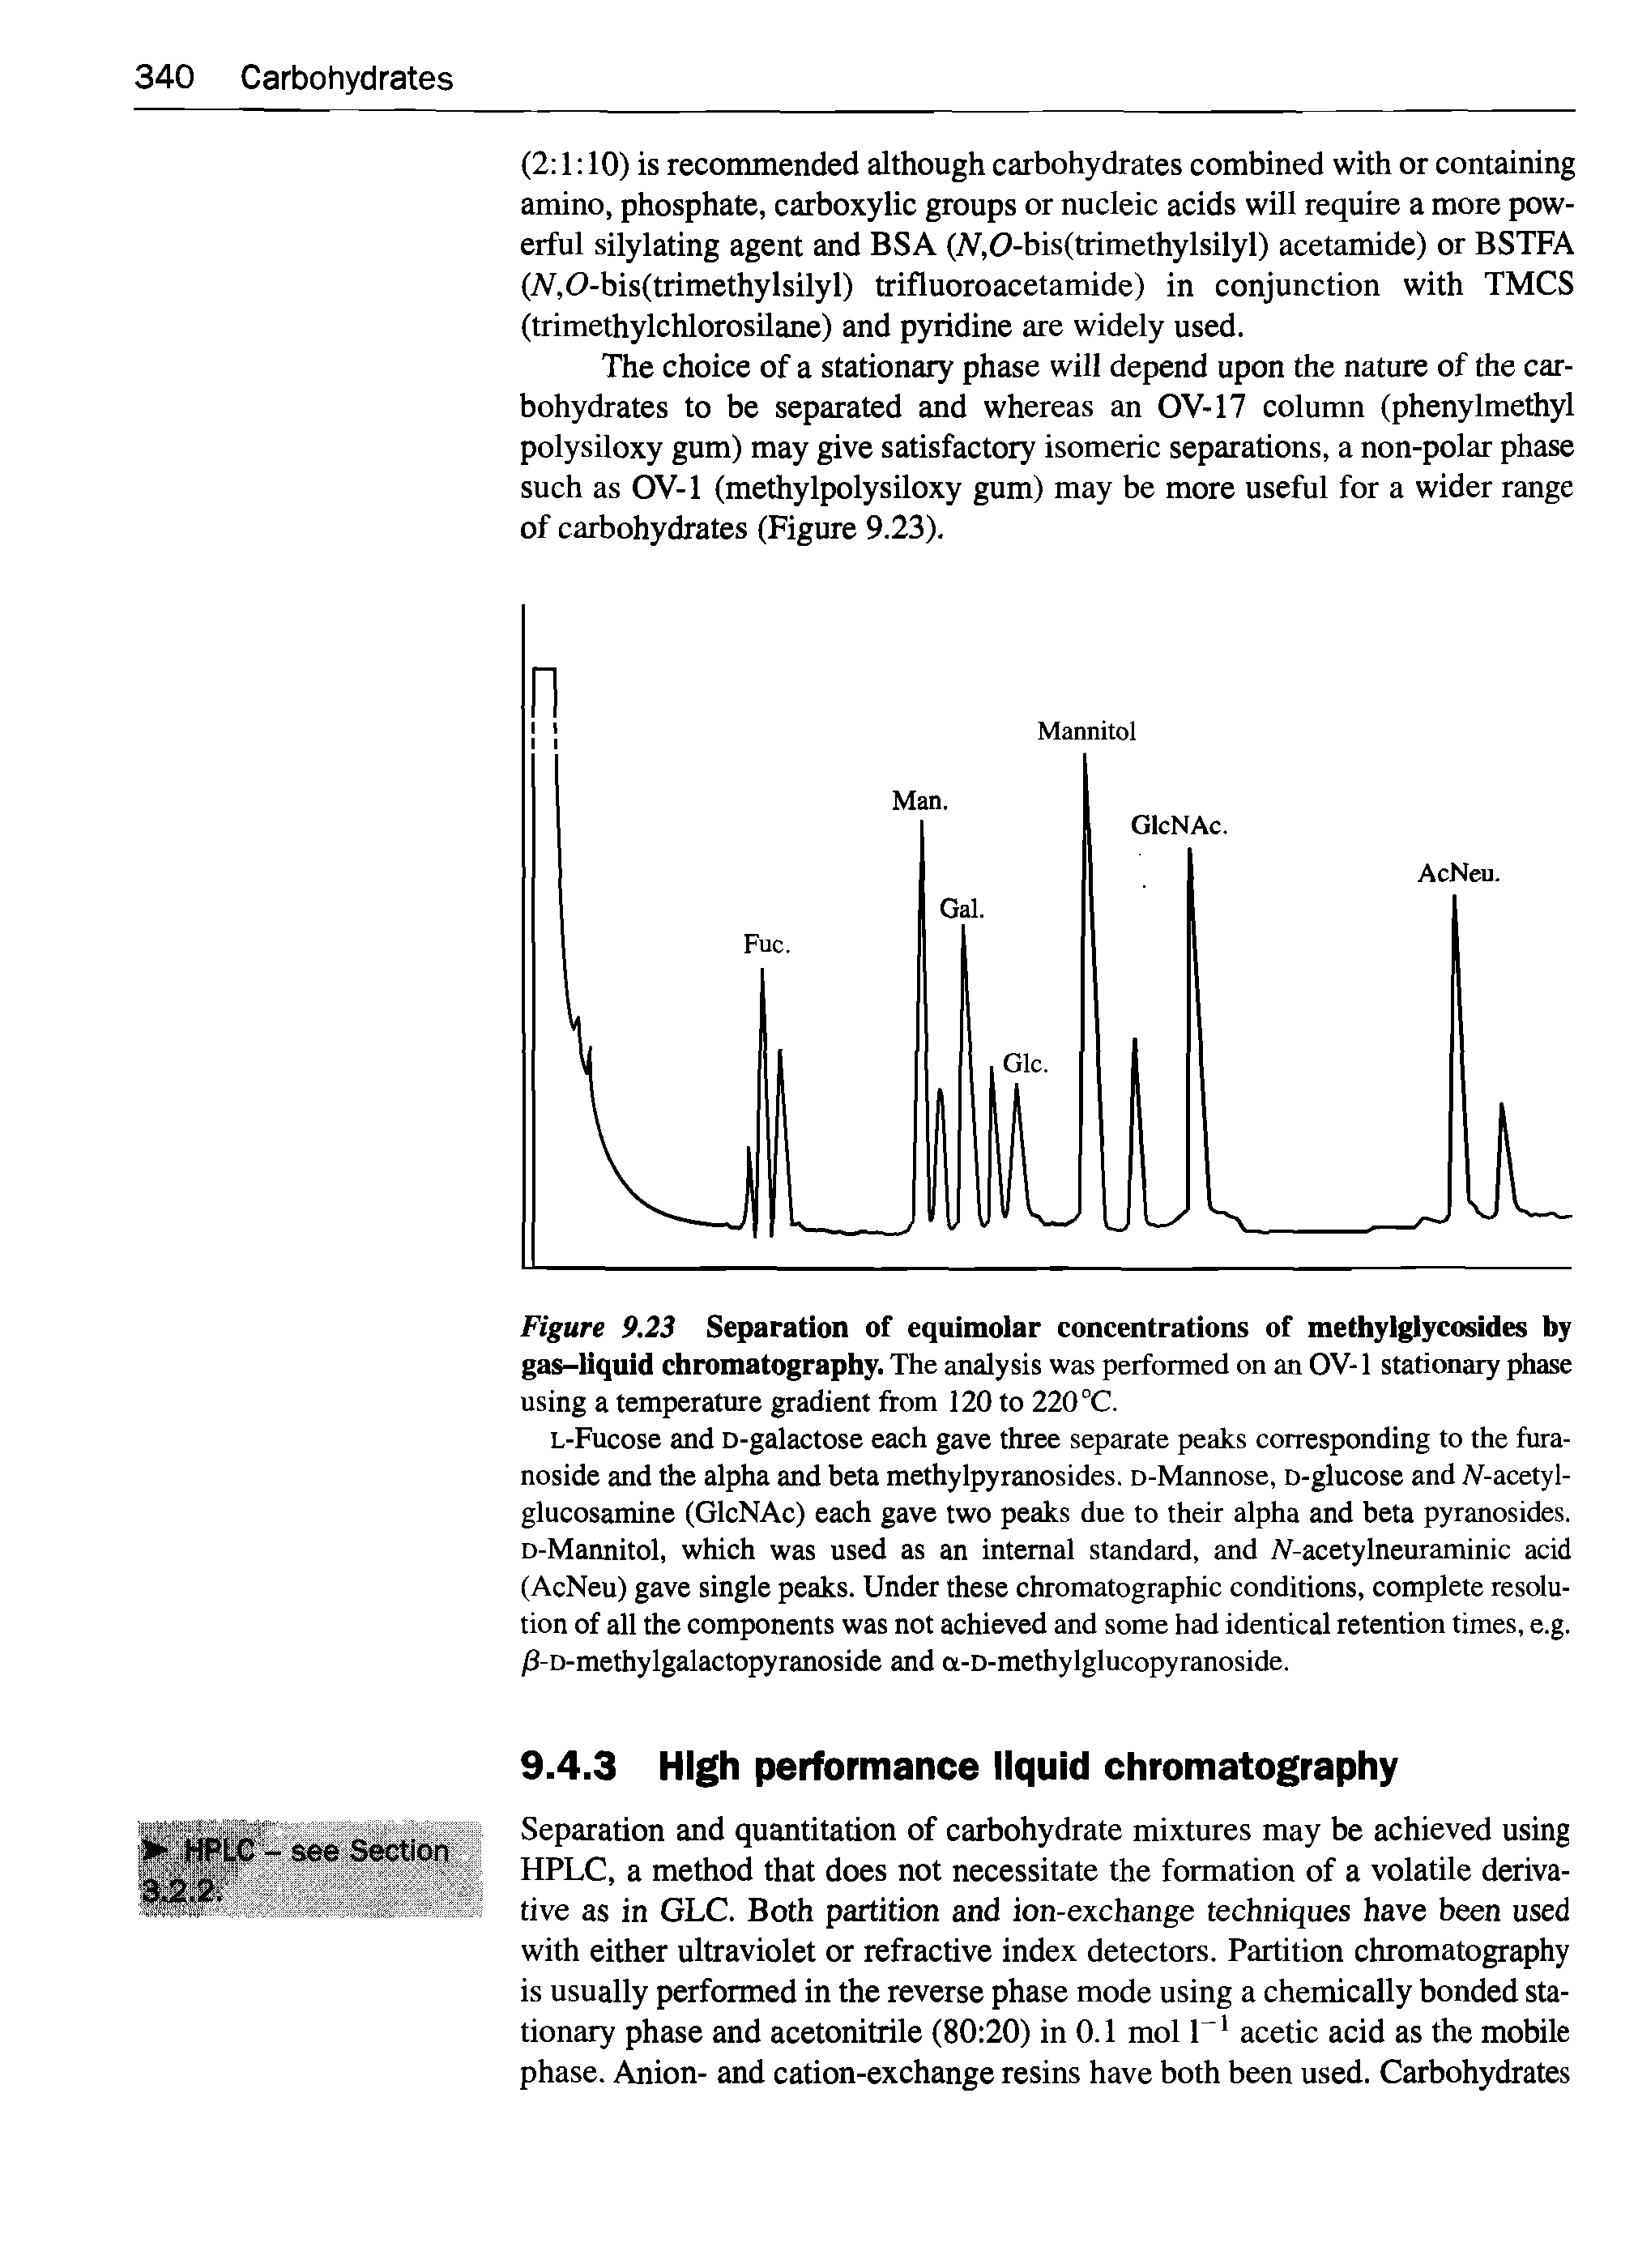 Figure 9.23 Separation of equimolar concentrations of methylglycosides by gas-liquid chromatography. The analysis was performed on an OV-1 stationary phase using a temperature gradient from 120 to 220 °C.